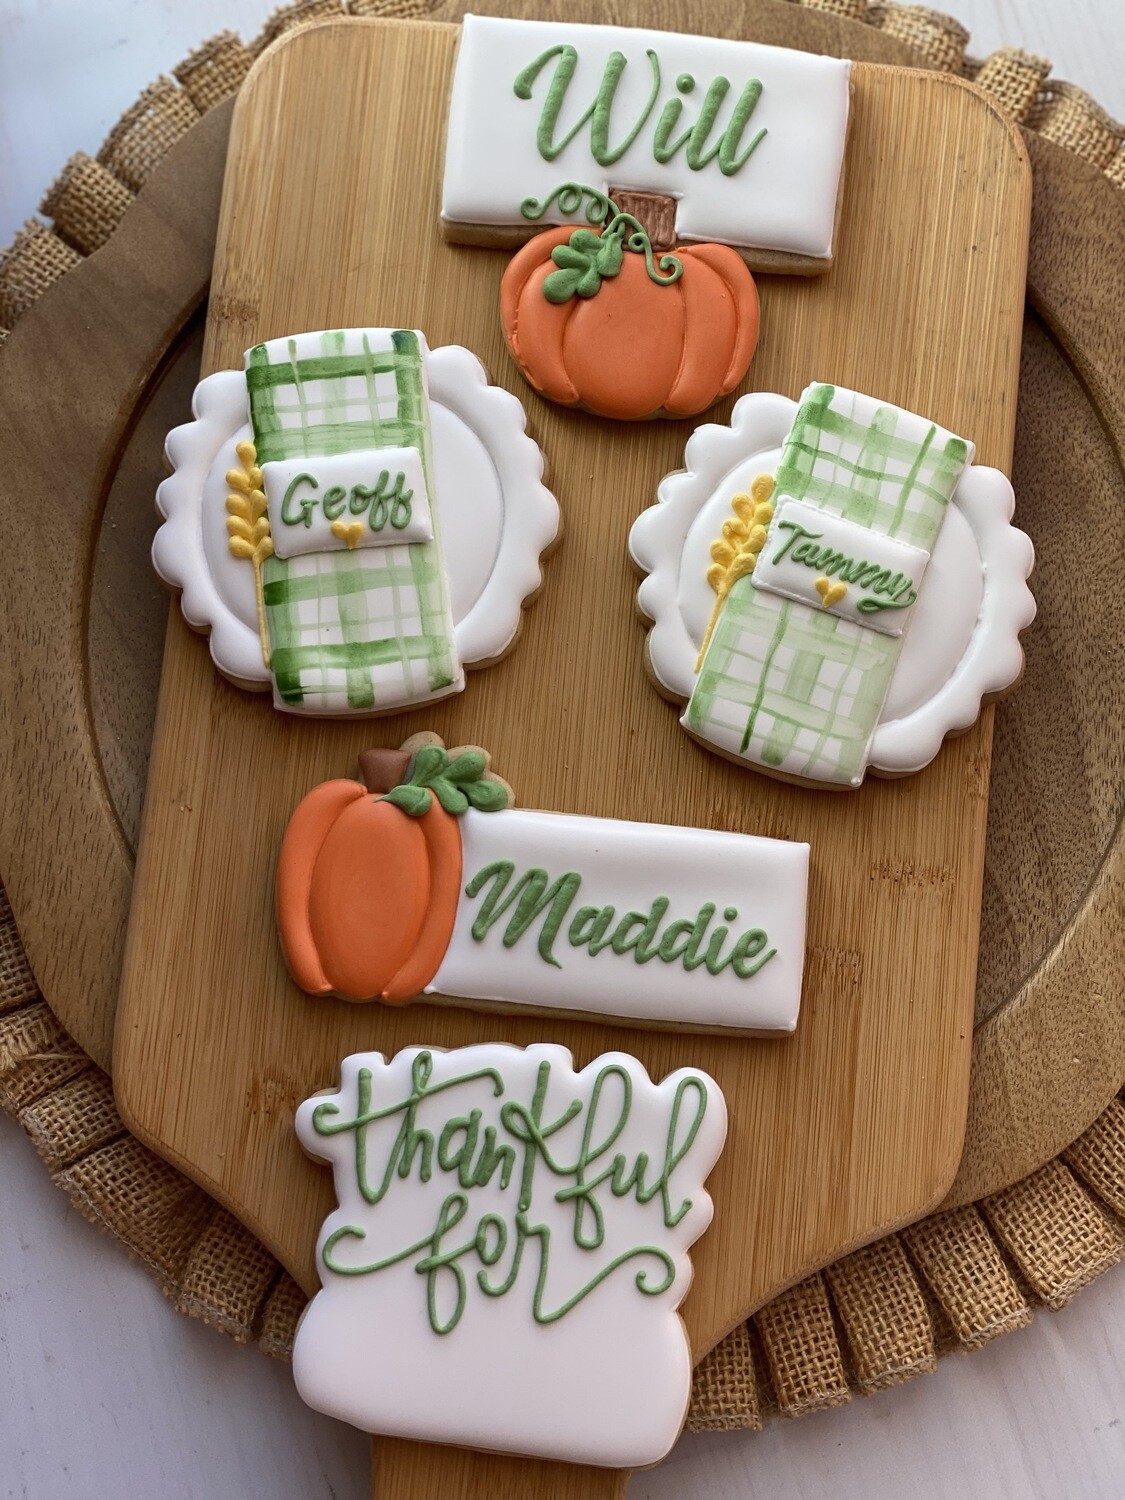 Personalized "Will" design Placecard Cookies